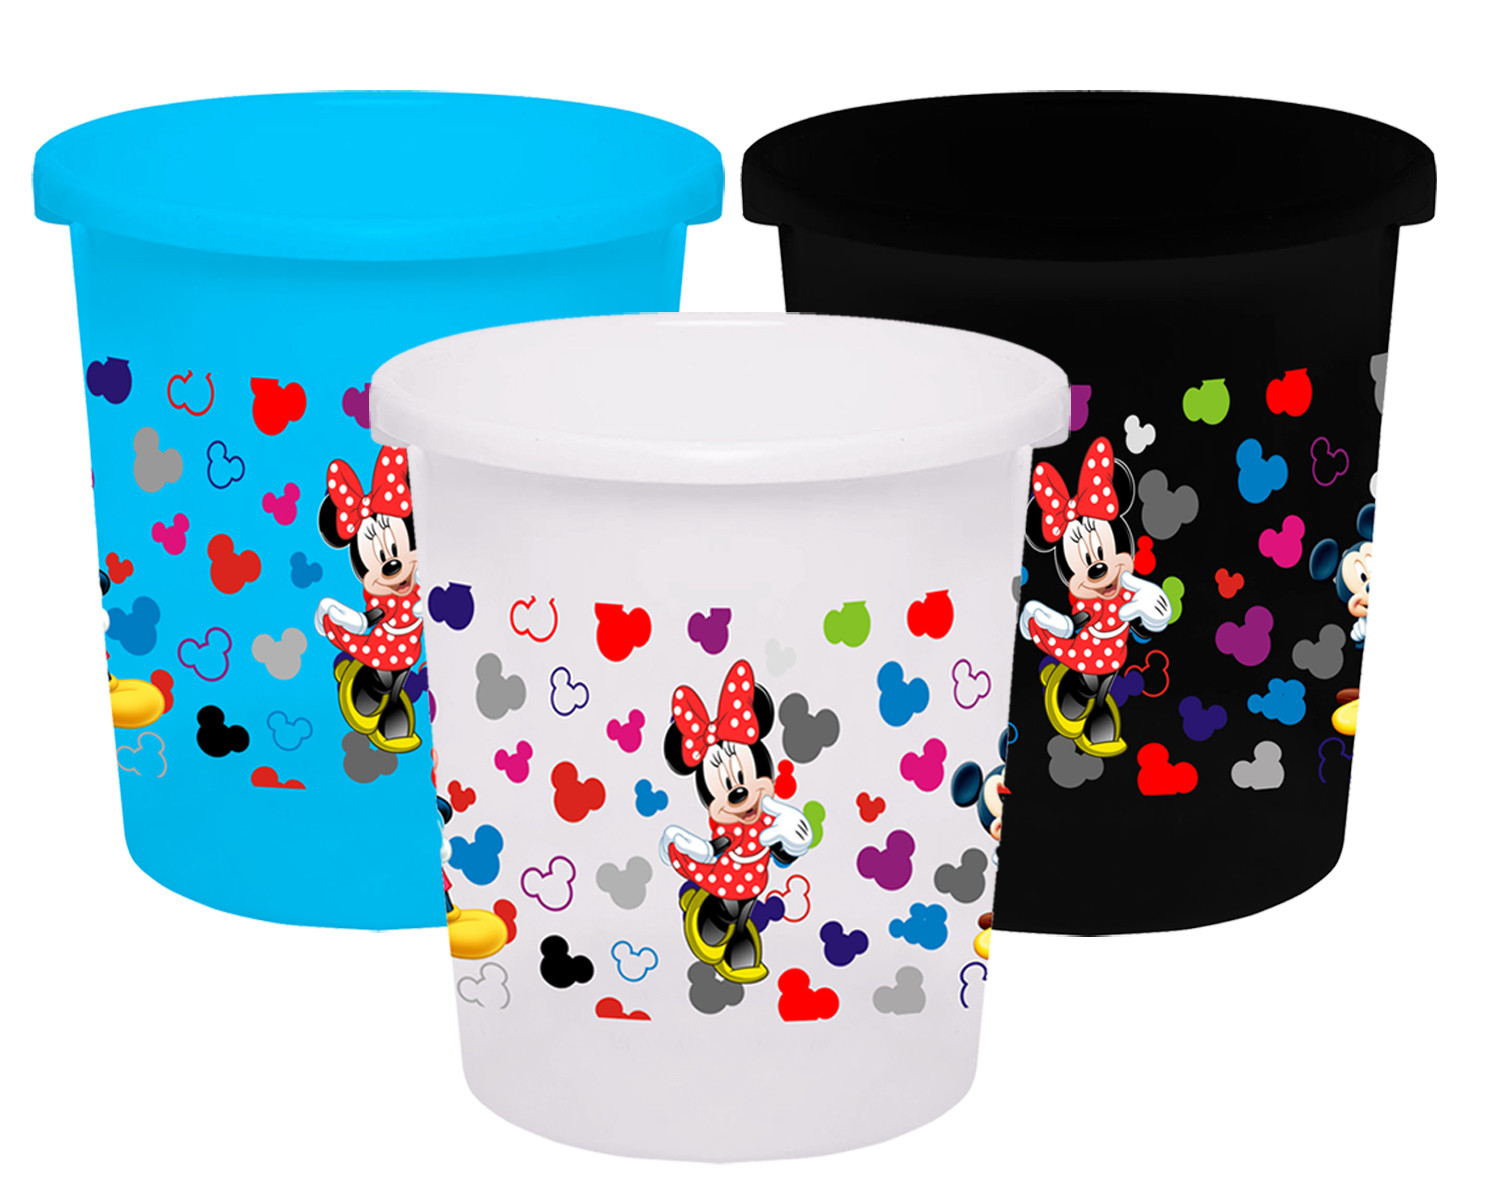 Kuber Industries Disney Team Mickey Print Plastic 3 Pieces Garbage Waste Dustbin/Recycling Bin for Home, Office, Factory, 5 Liters (Blue & Black & White) -HS_35_KUBMART17375